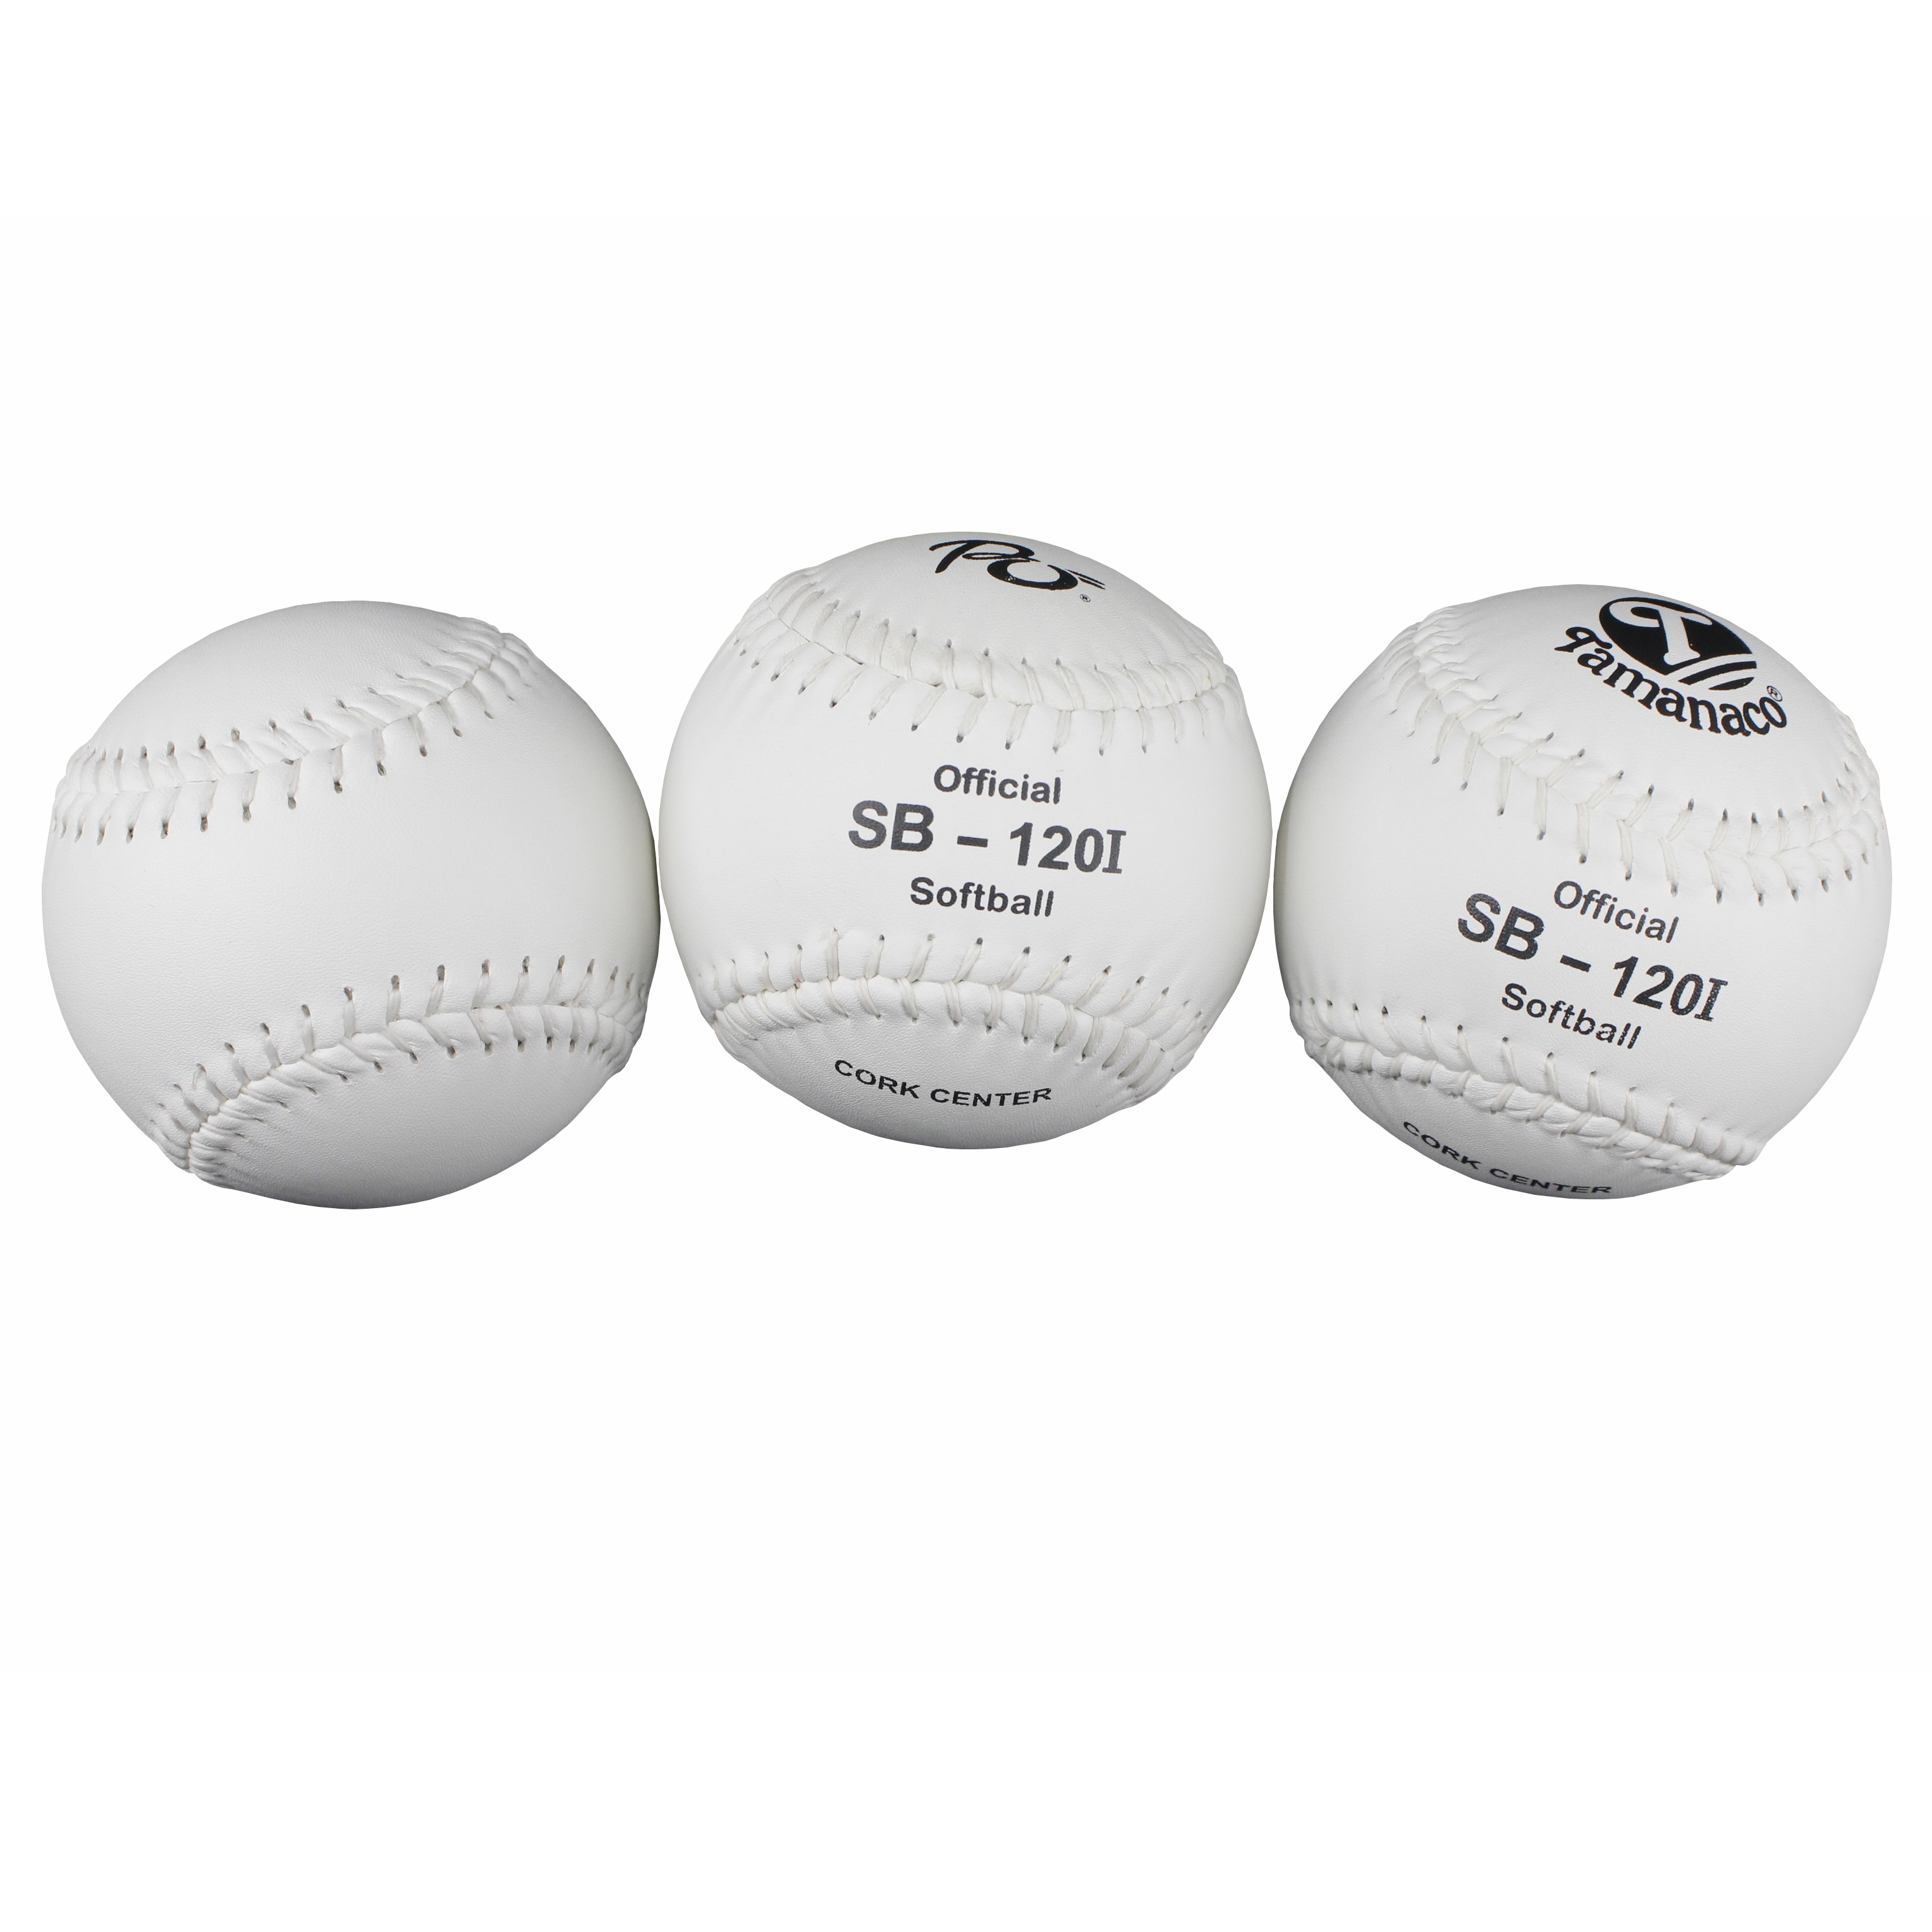 Factory Price 12 Inch Tamanaco Softball White Leather Cover High Quality Cork Center Slow Pitch for Whole Sale